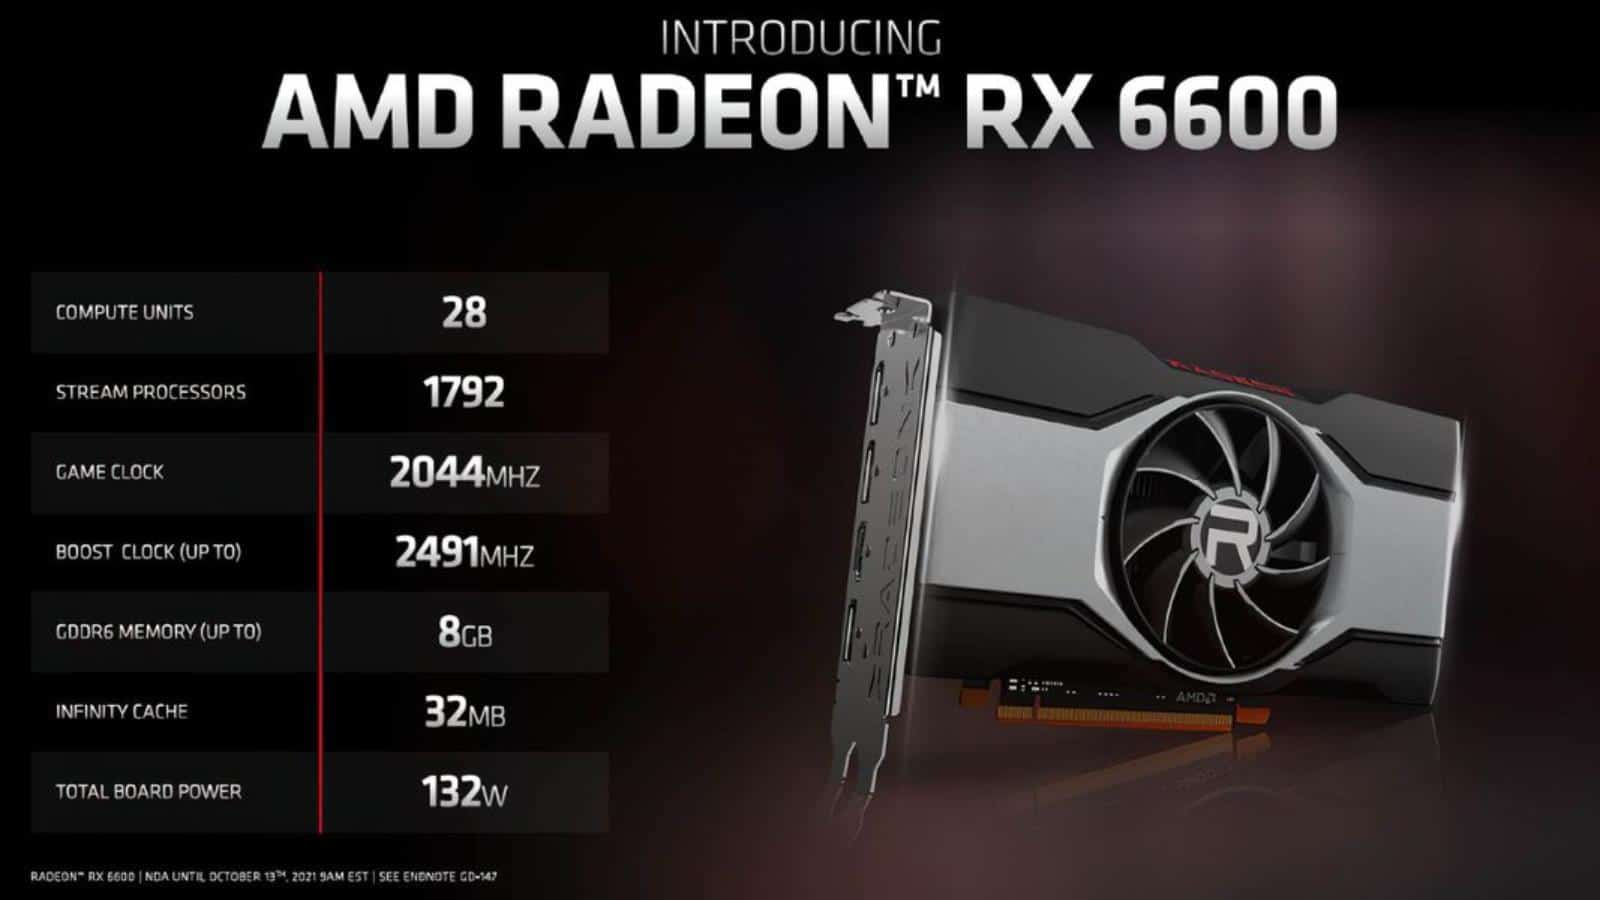 The premiere of the Radeon RX 6600. We waited a long time for this AMD graphics card, and it is not there